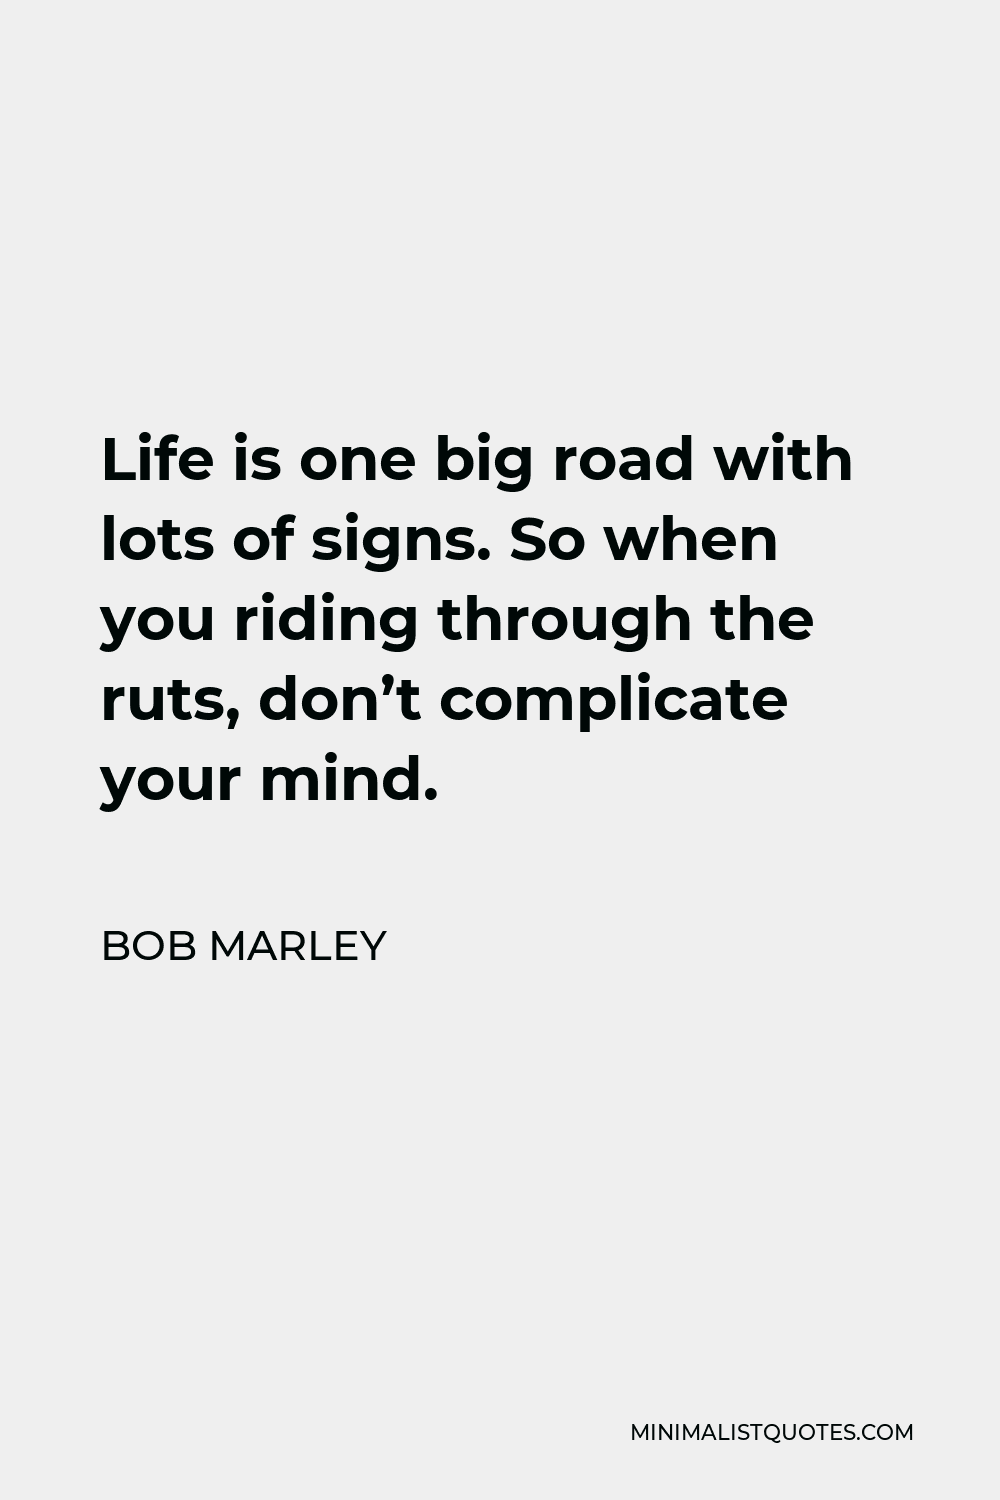 Bob Marley Quote - Life is one big road with lots of signs. So when you riding through the ruts, don’t complicate your mind.